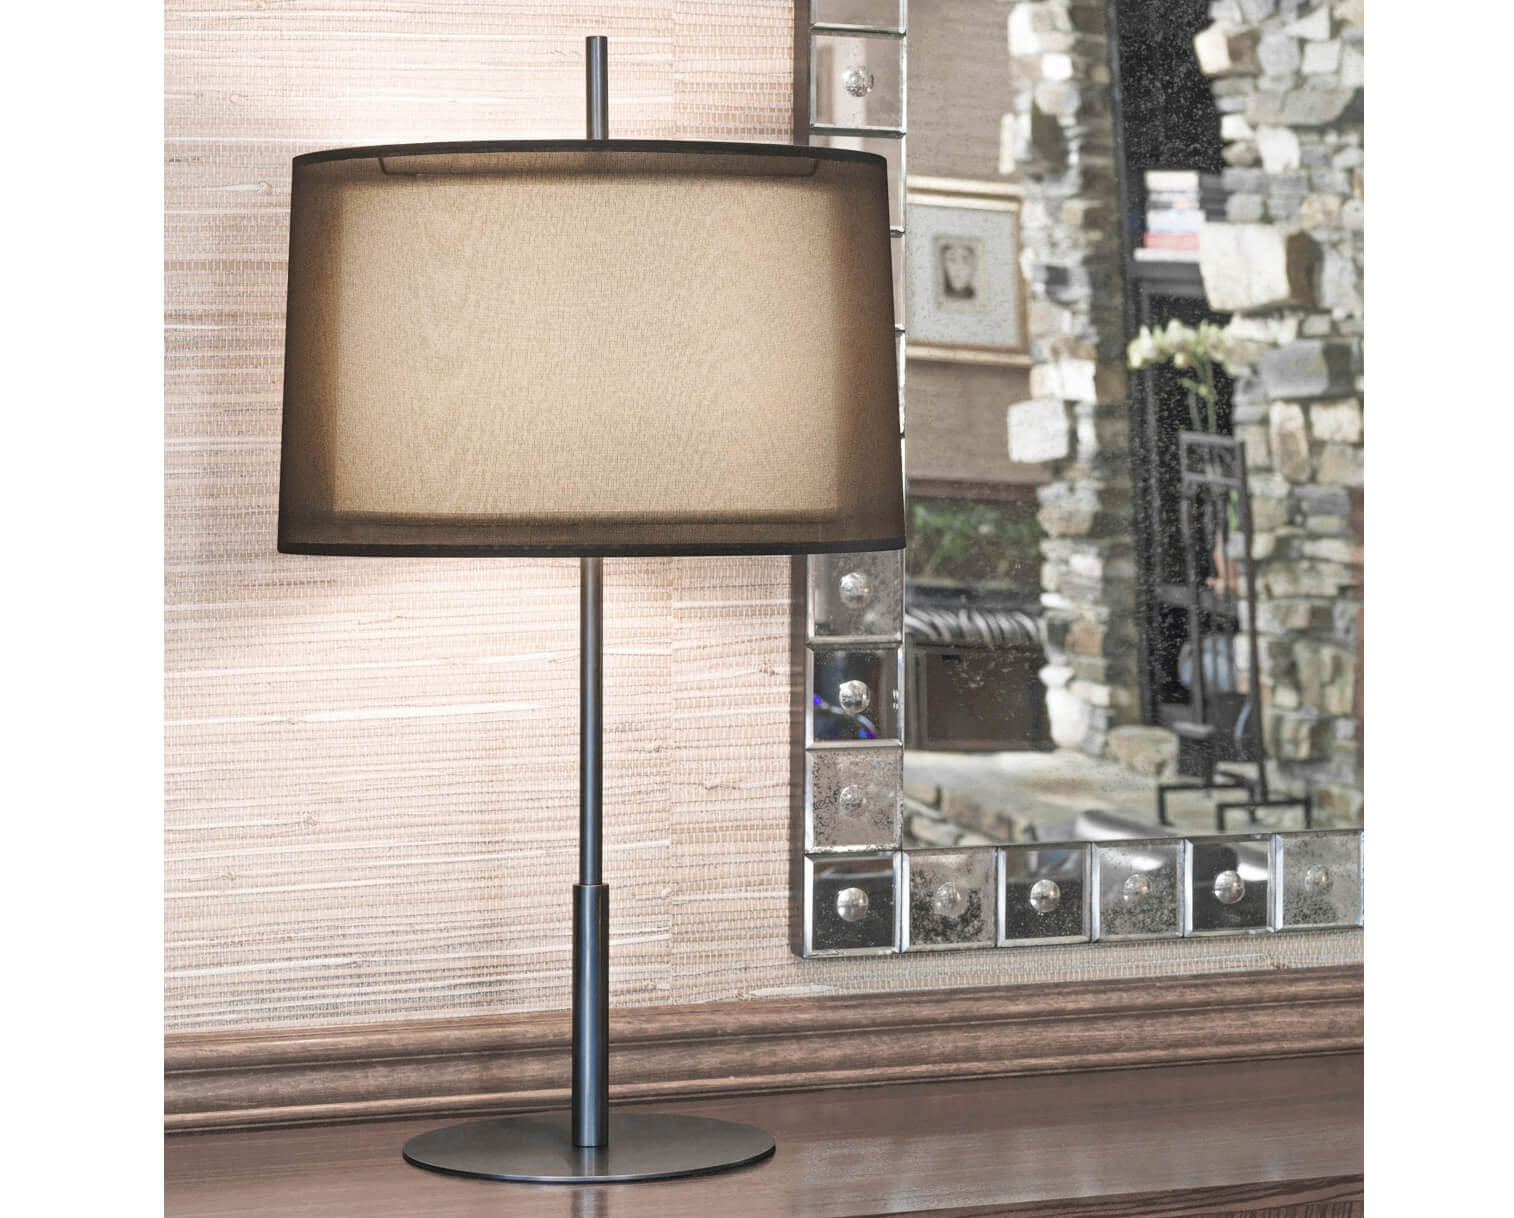 SATURNIA TABLE LAMP by Robert Abbey